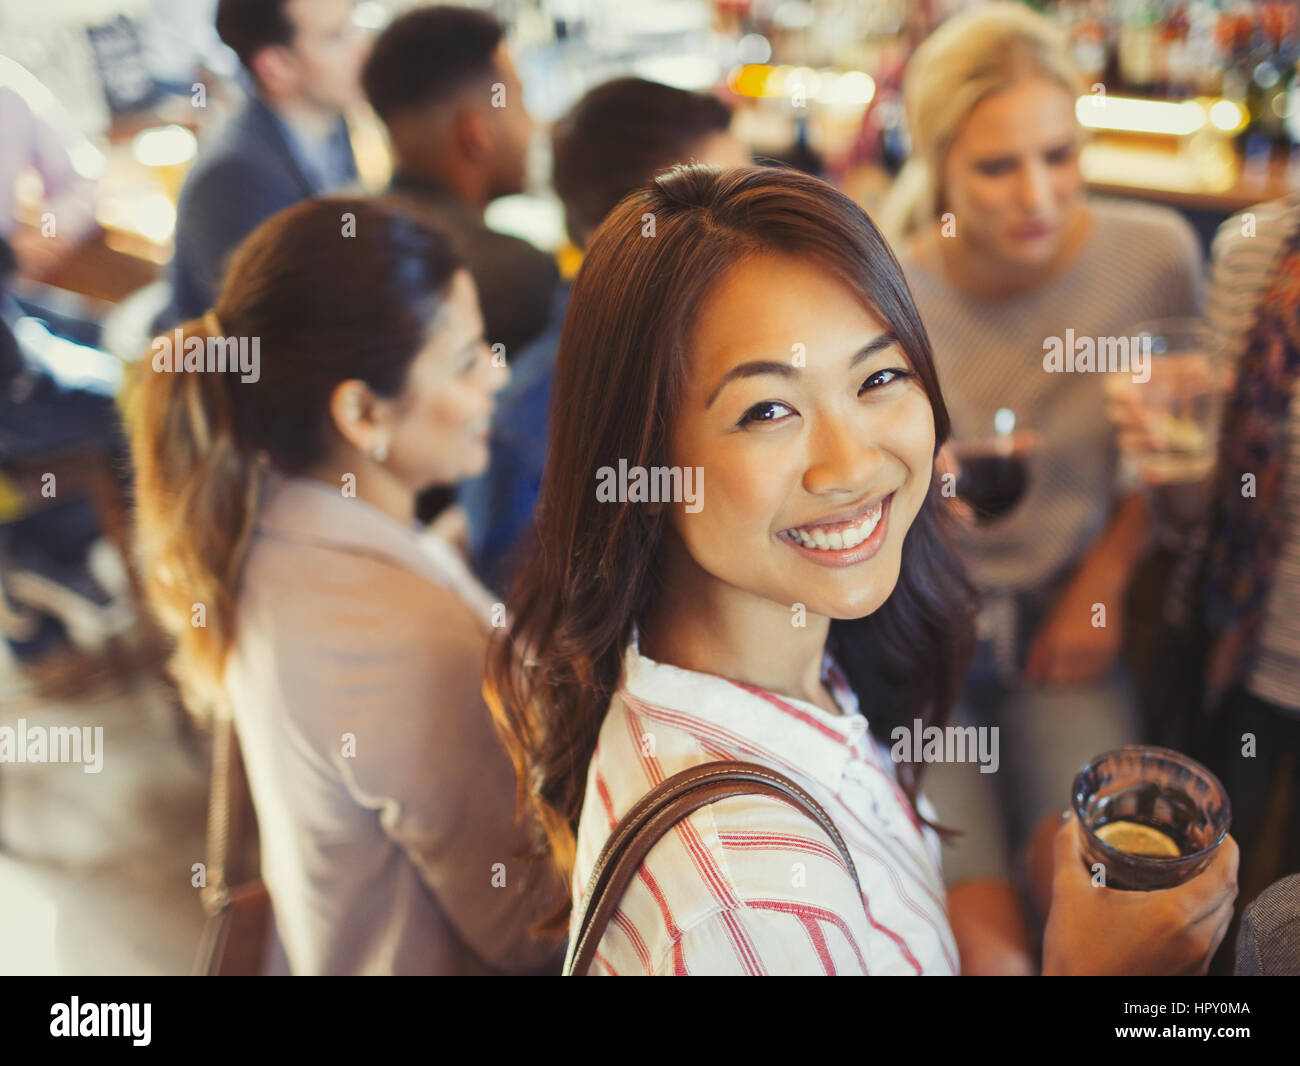 Portrait smiling woman drinking with friends at bar Stock Photo